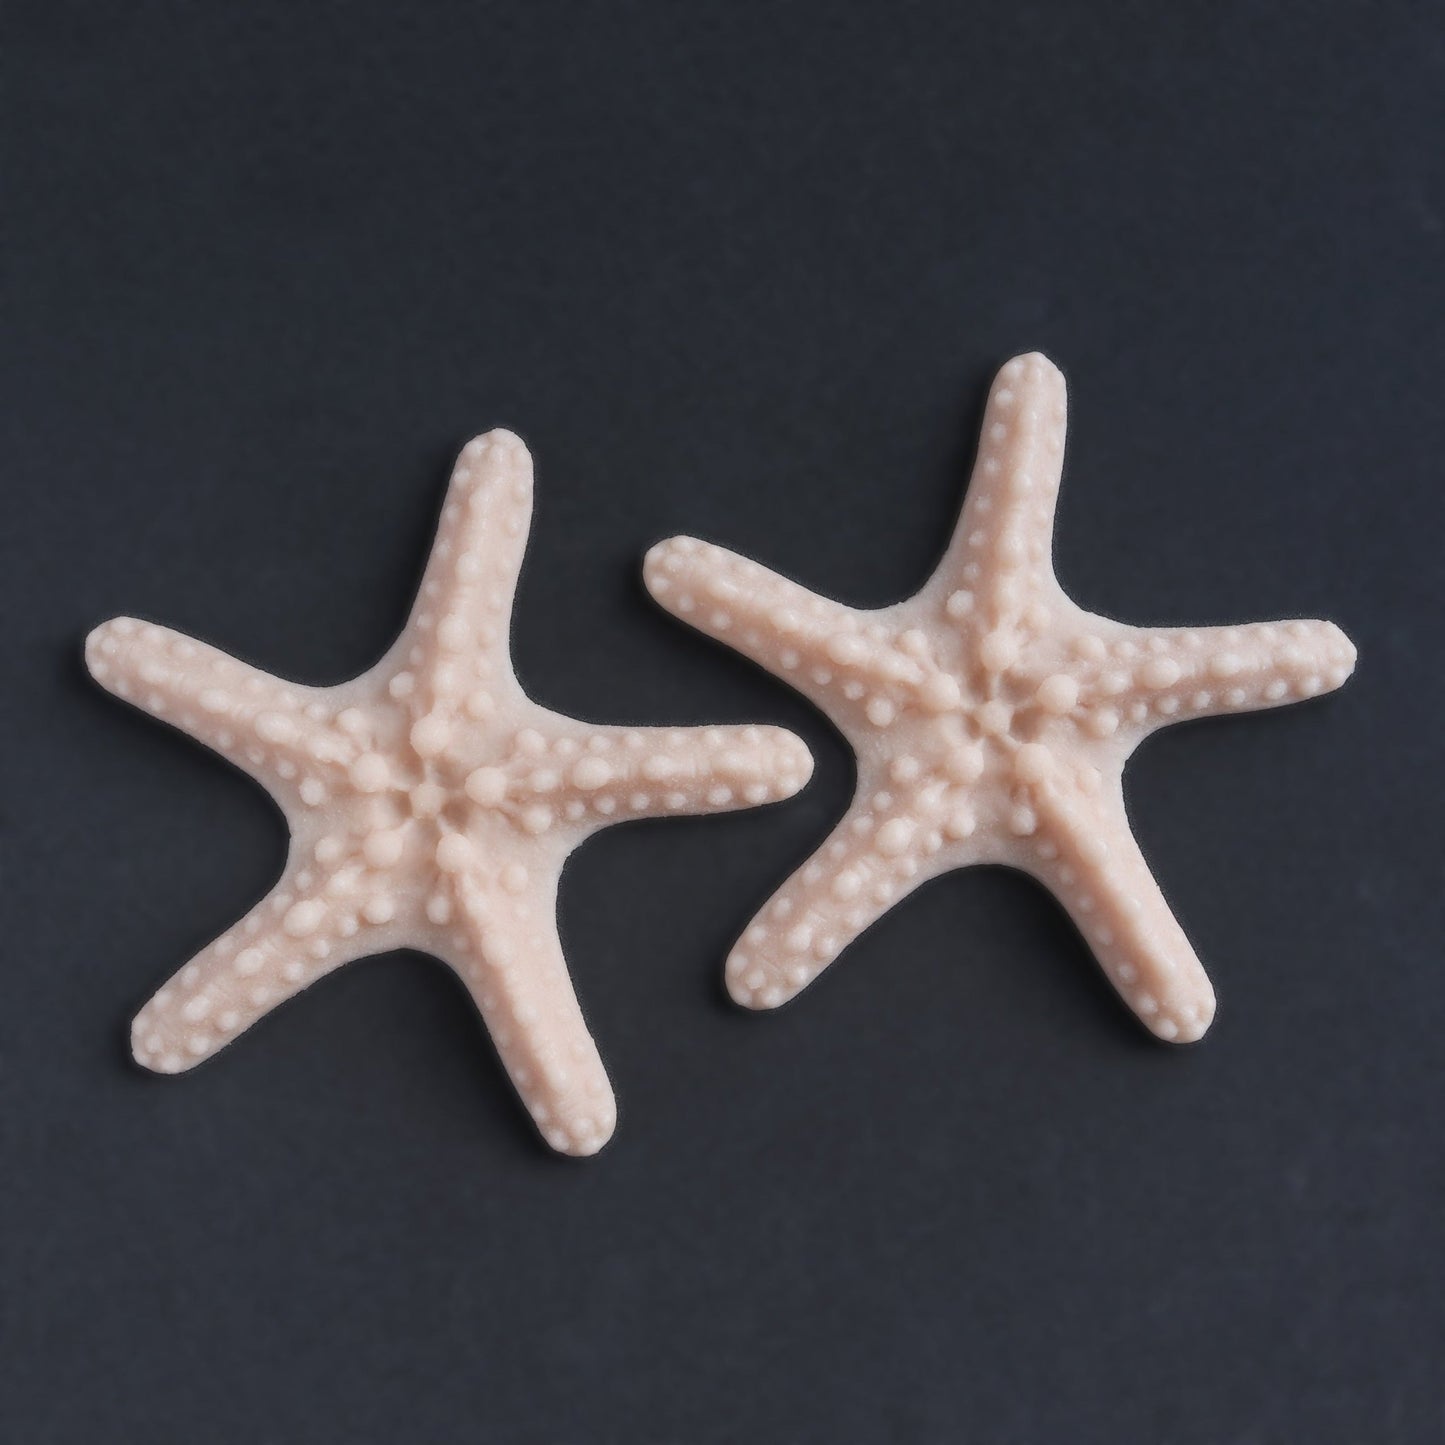 Two starfish in vanilla shade on a black surface